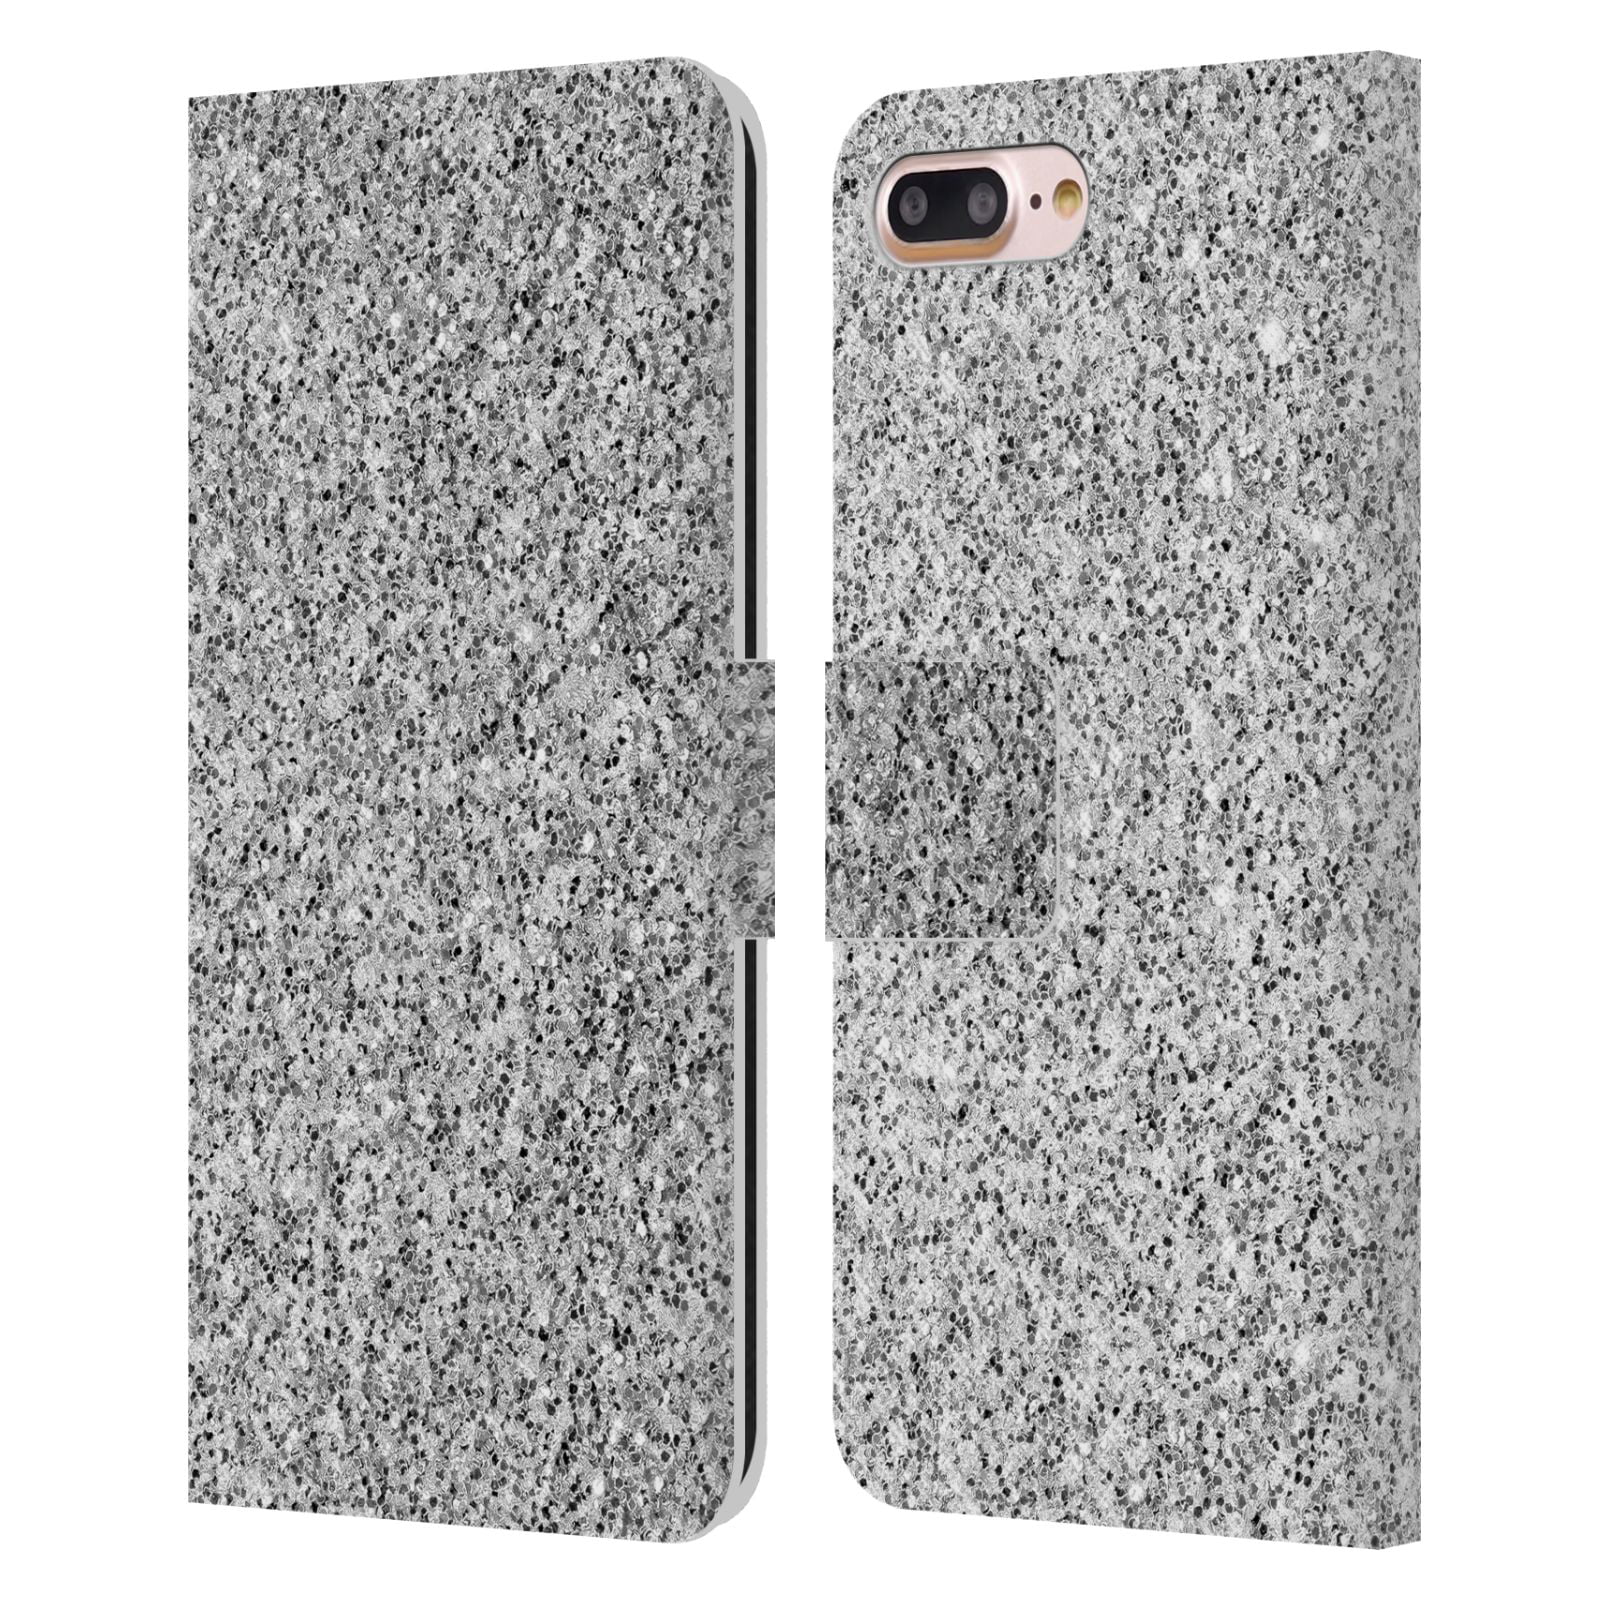 Head Case Designs Officially Licensed PLdesign Glitter Sparkles Champagne Gold Book Wallet Case Cover Compatible with Apple iPhone 5 5s / SE - Walmart.com